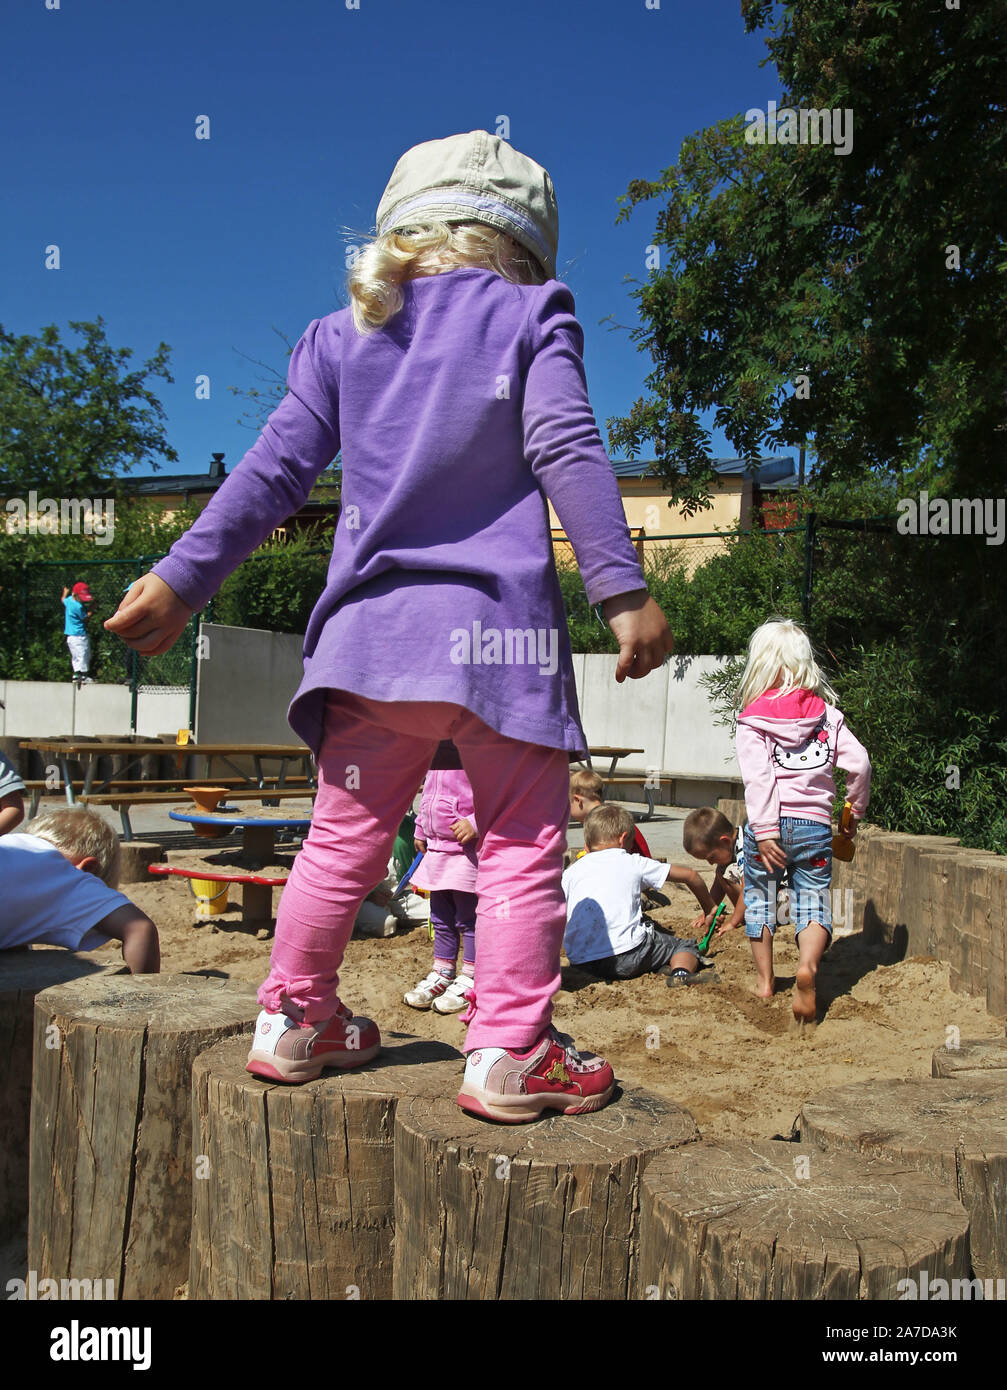 Playing child at a preschool.Photo Jeppe Gustafsson Stock Photo